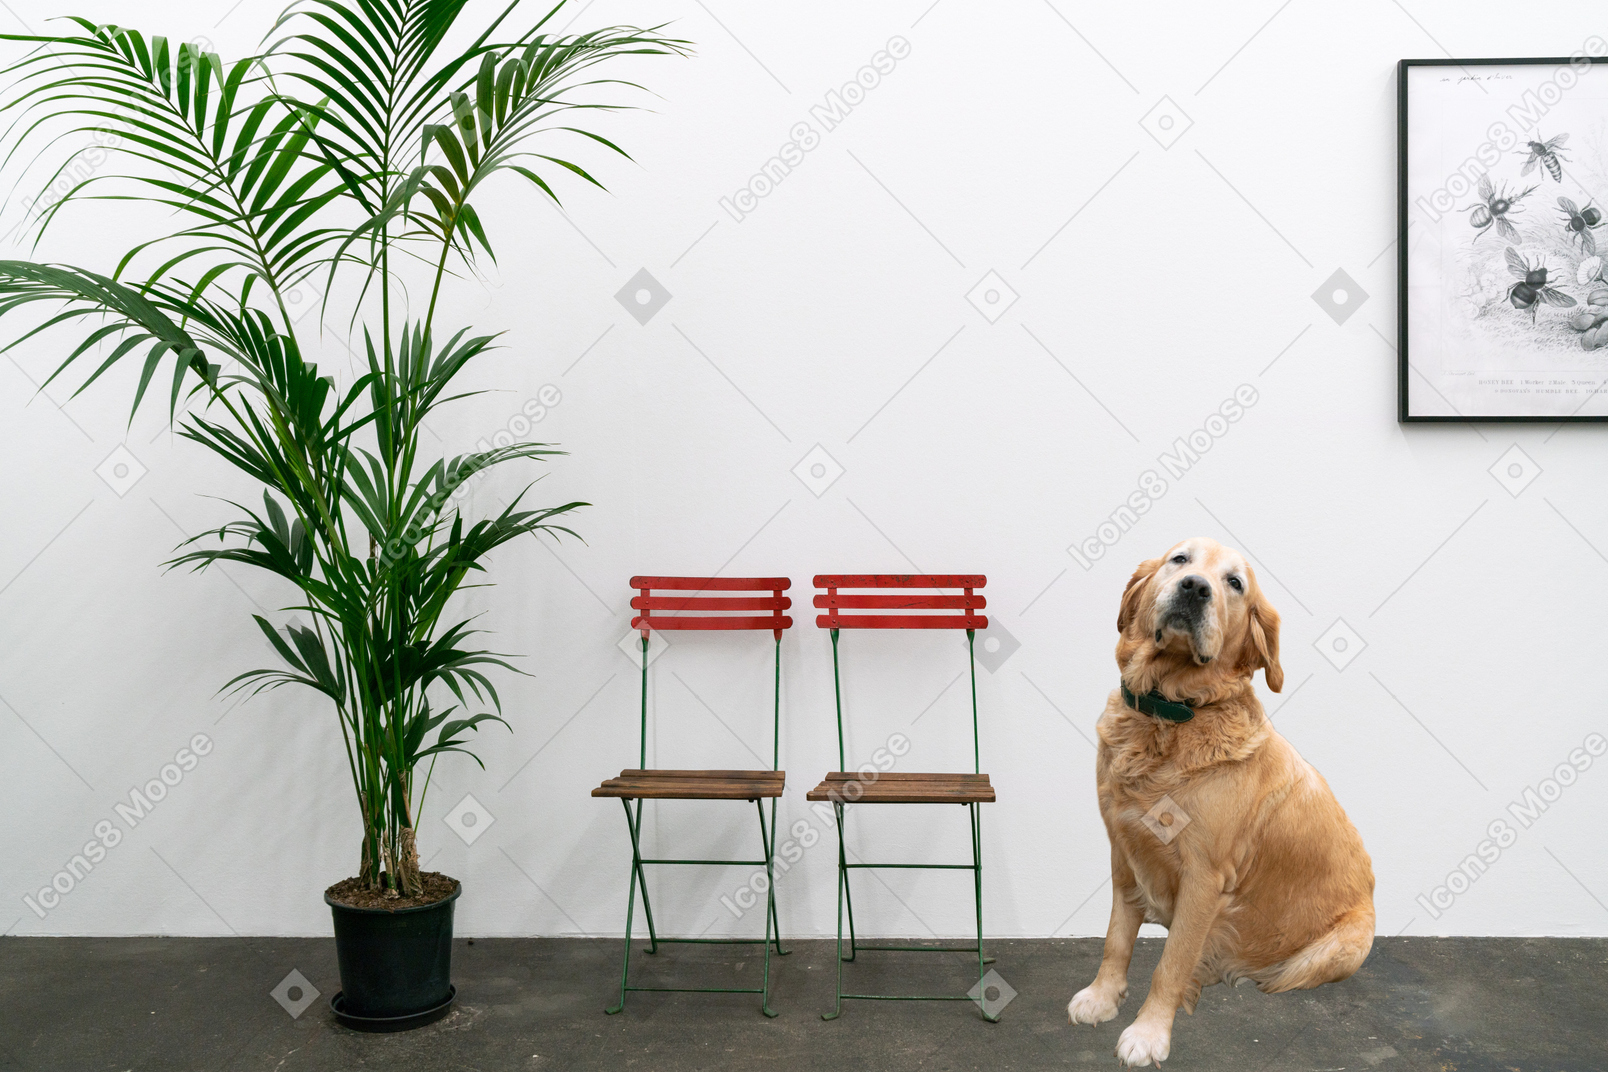 A dog in a living room